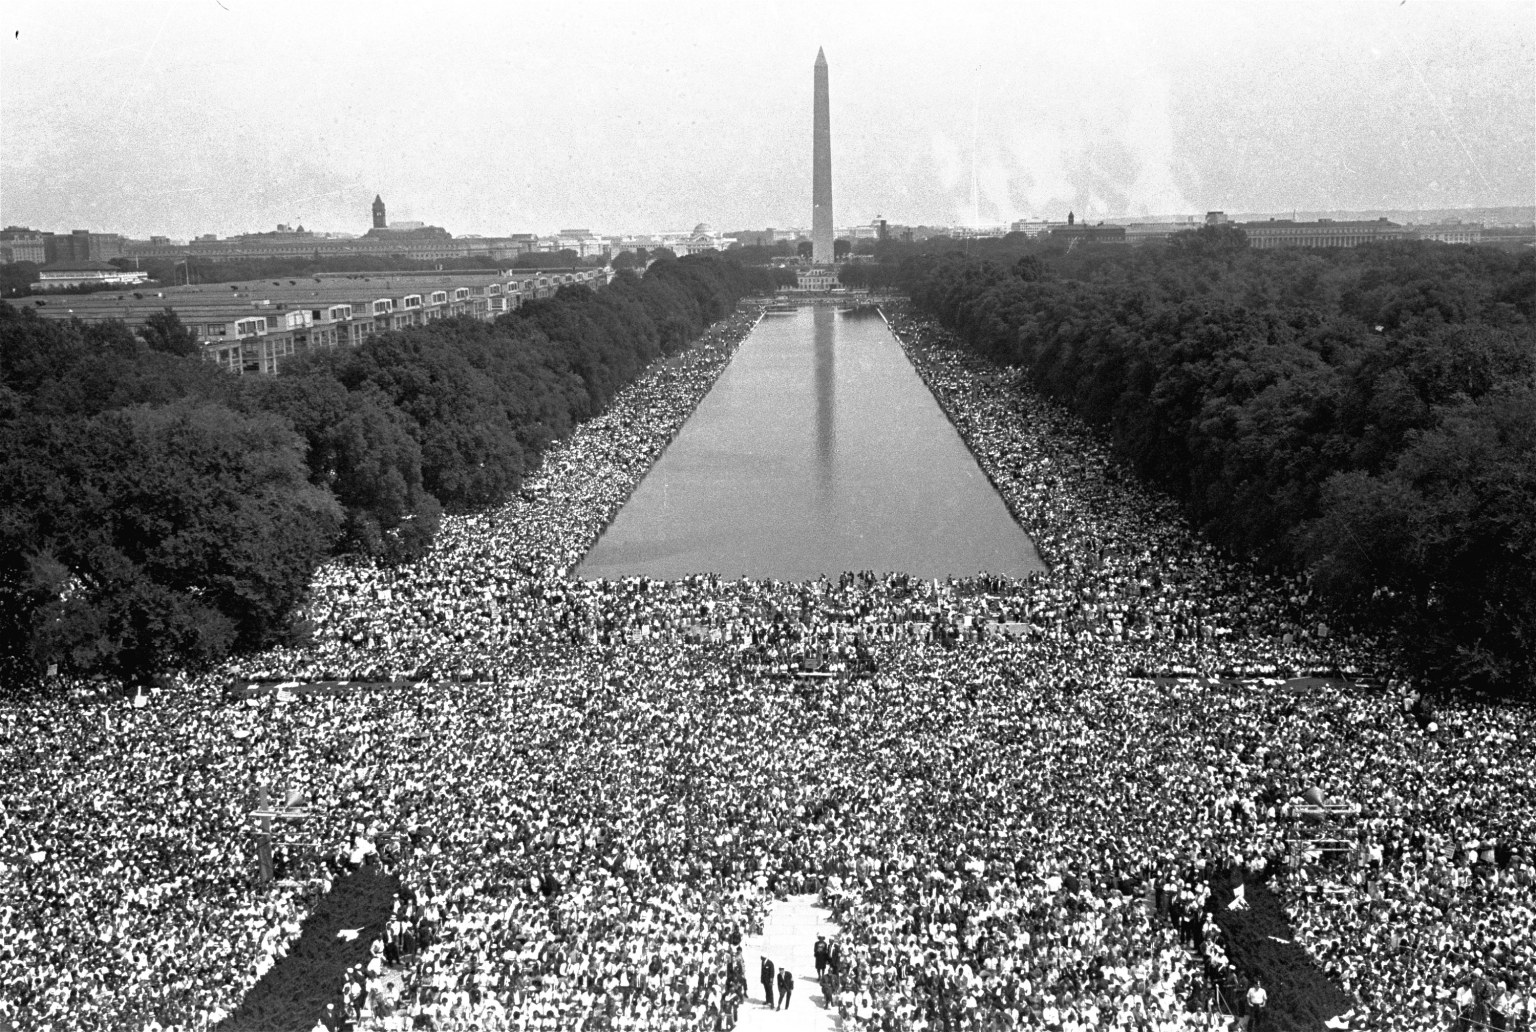 Crowds are shown in front of the Washington Monument during the March on Washington for civil rights, August 28, 1963.  (AP Photo)